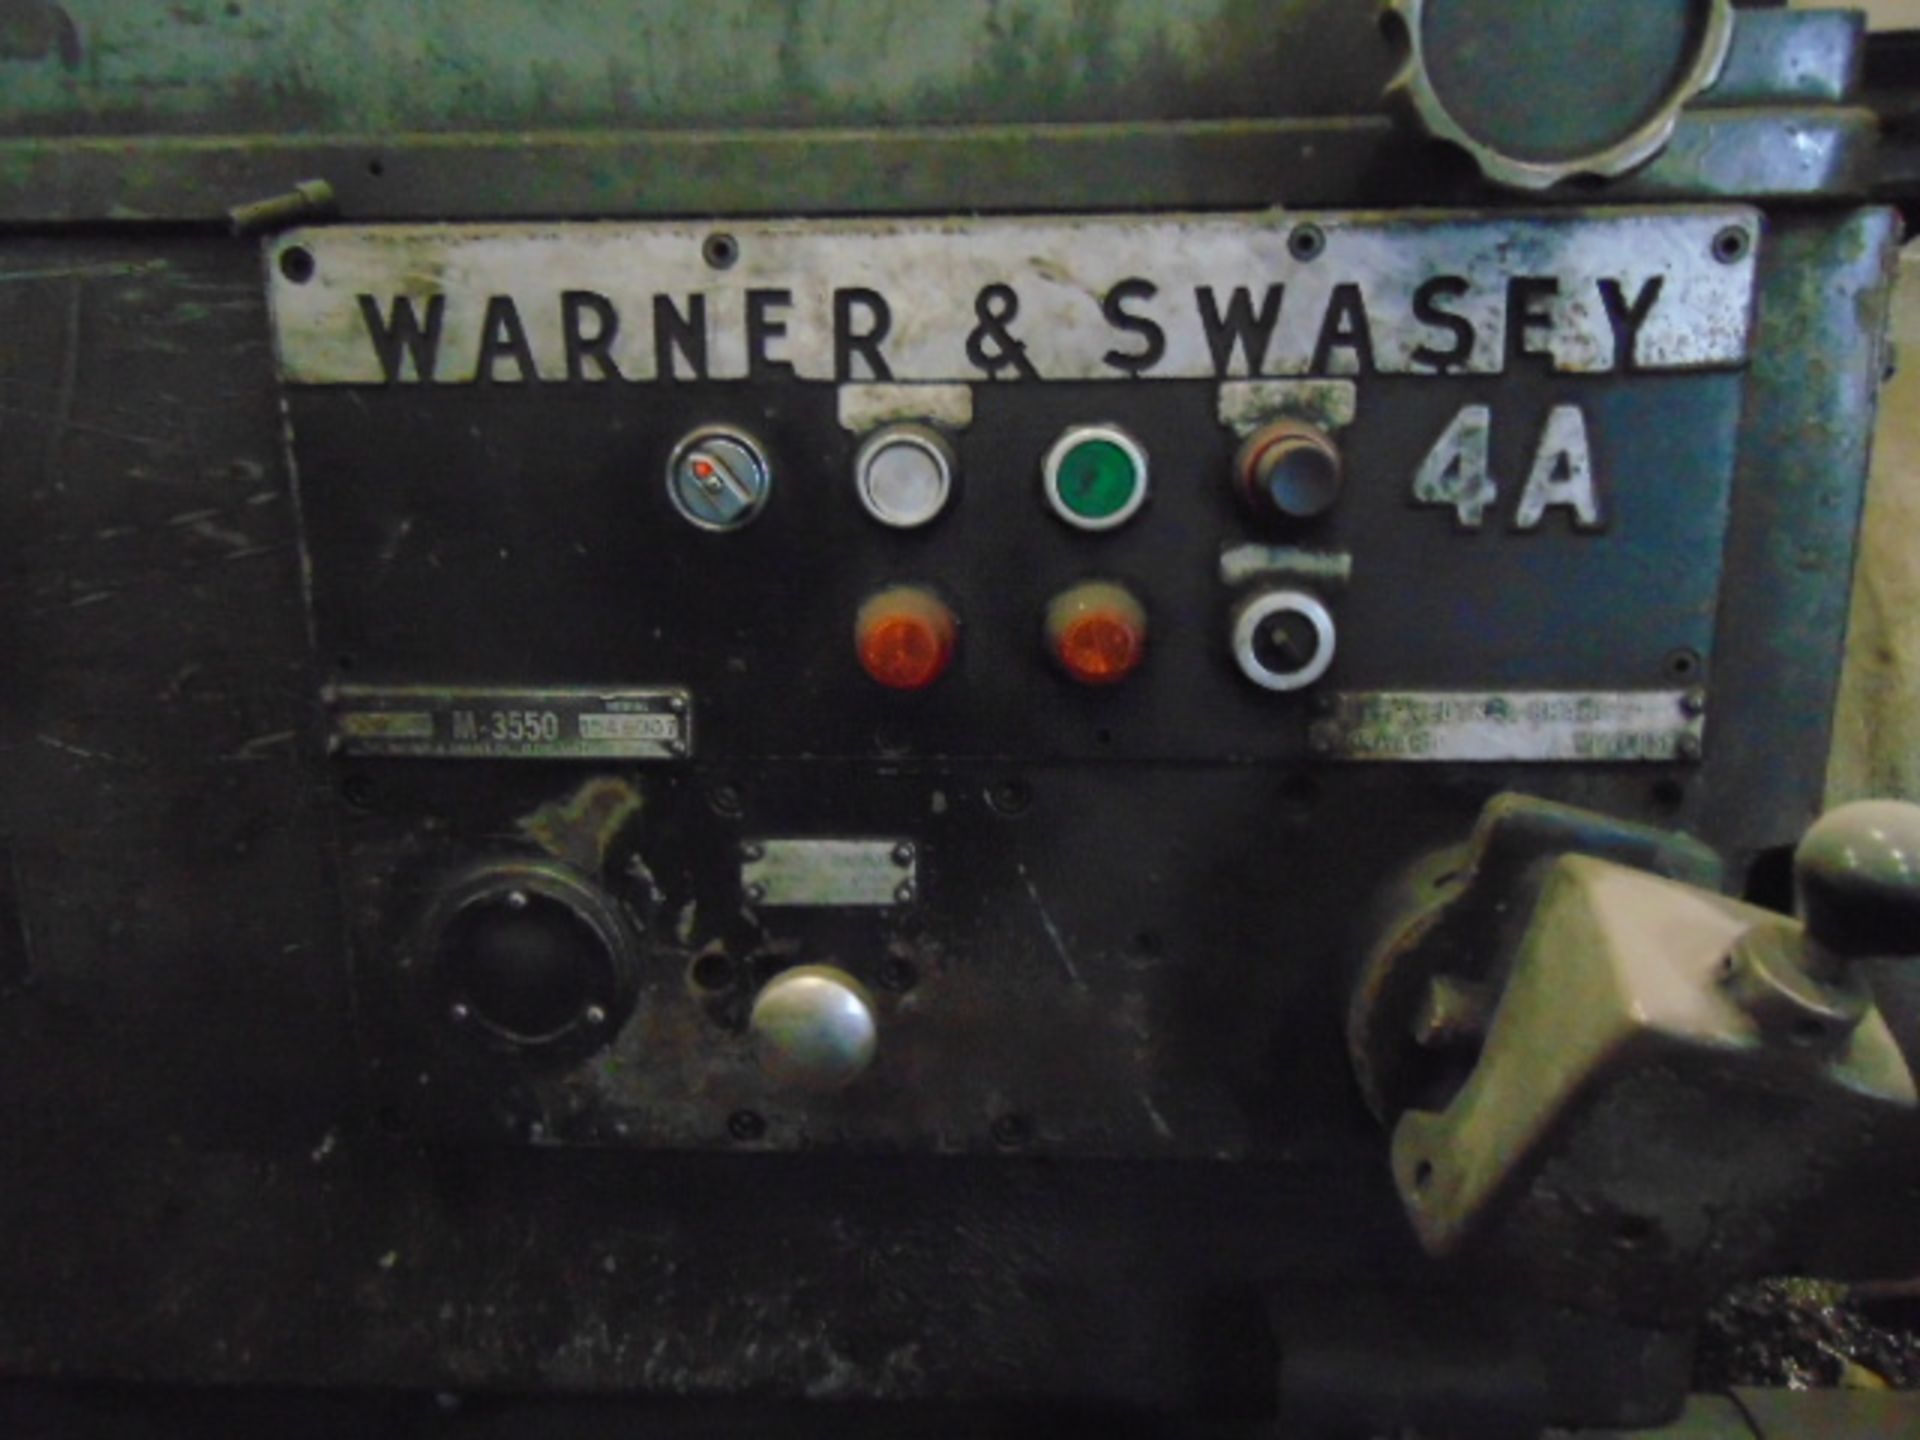 TURRET LATHE, WARNER & SWASEY MDL. 4A M-3350, S/N 1546007(Located at: Machine Station, 601 McFarland - Image 7 of 18